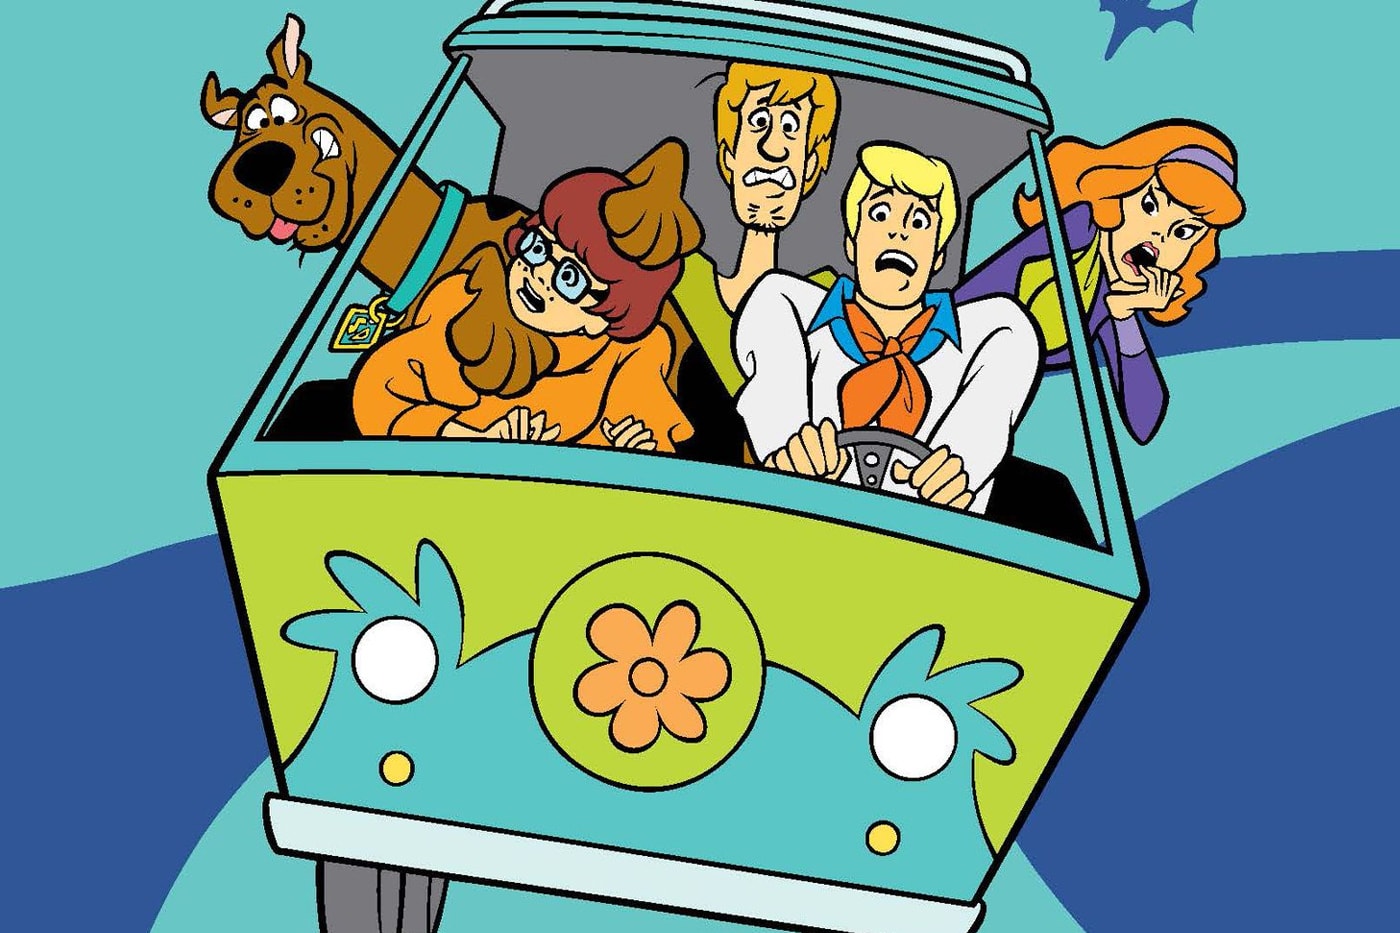 Live-Action Scooby-Doo Series in the Works Netflix reports